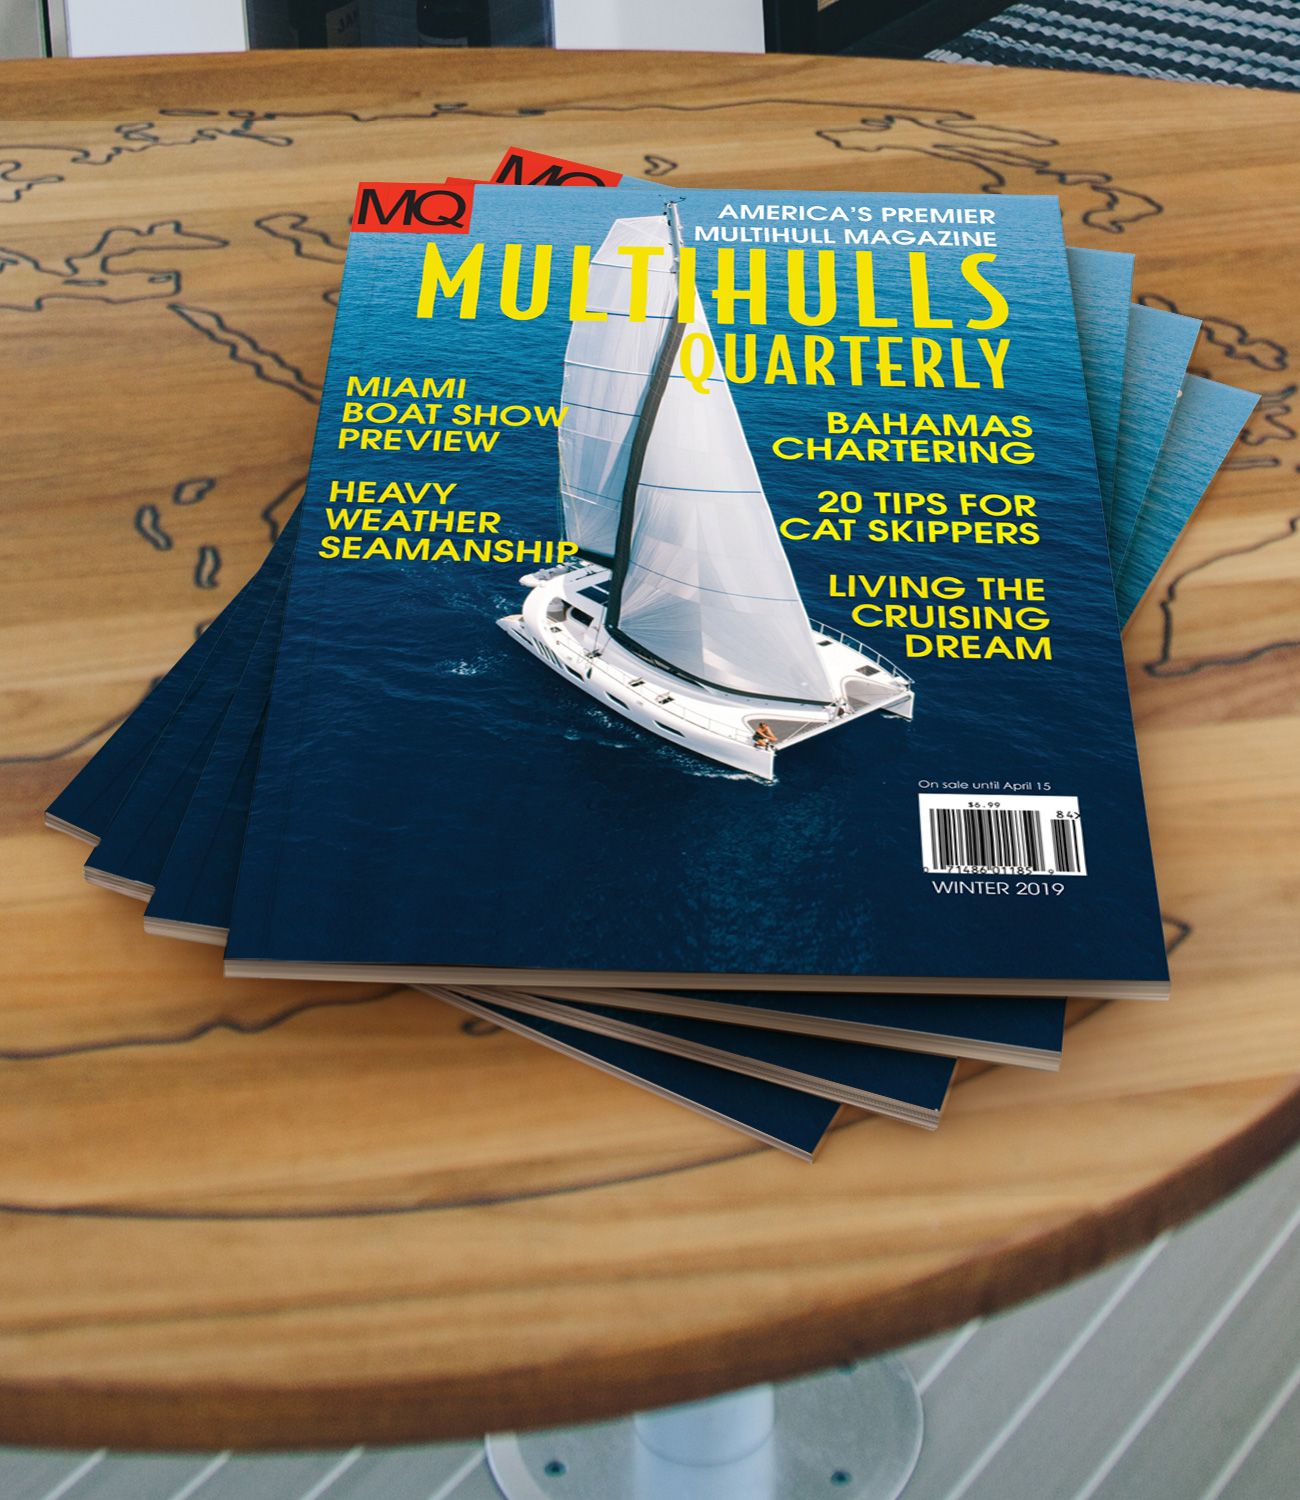 The X5 Sail first appears on a magazine cover